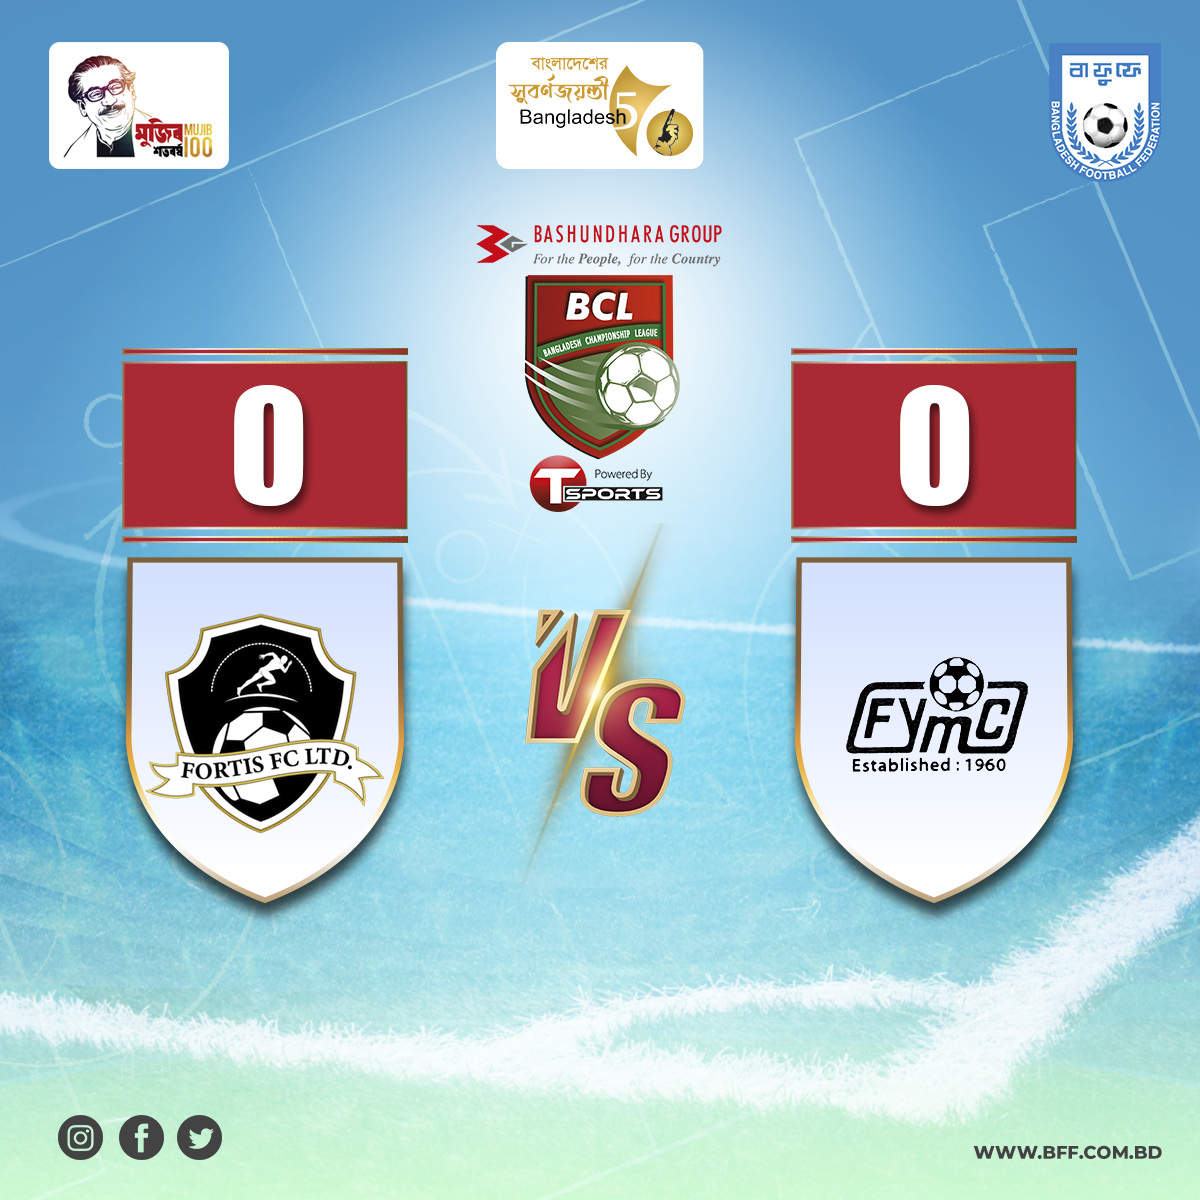 Fortis Vs Fakirerpool match was drawn by 0-0 goal | BCL 2021-22